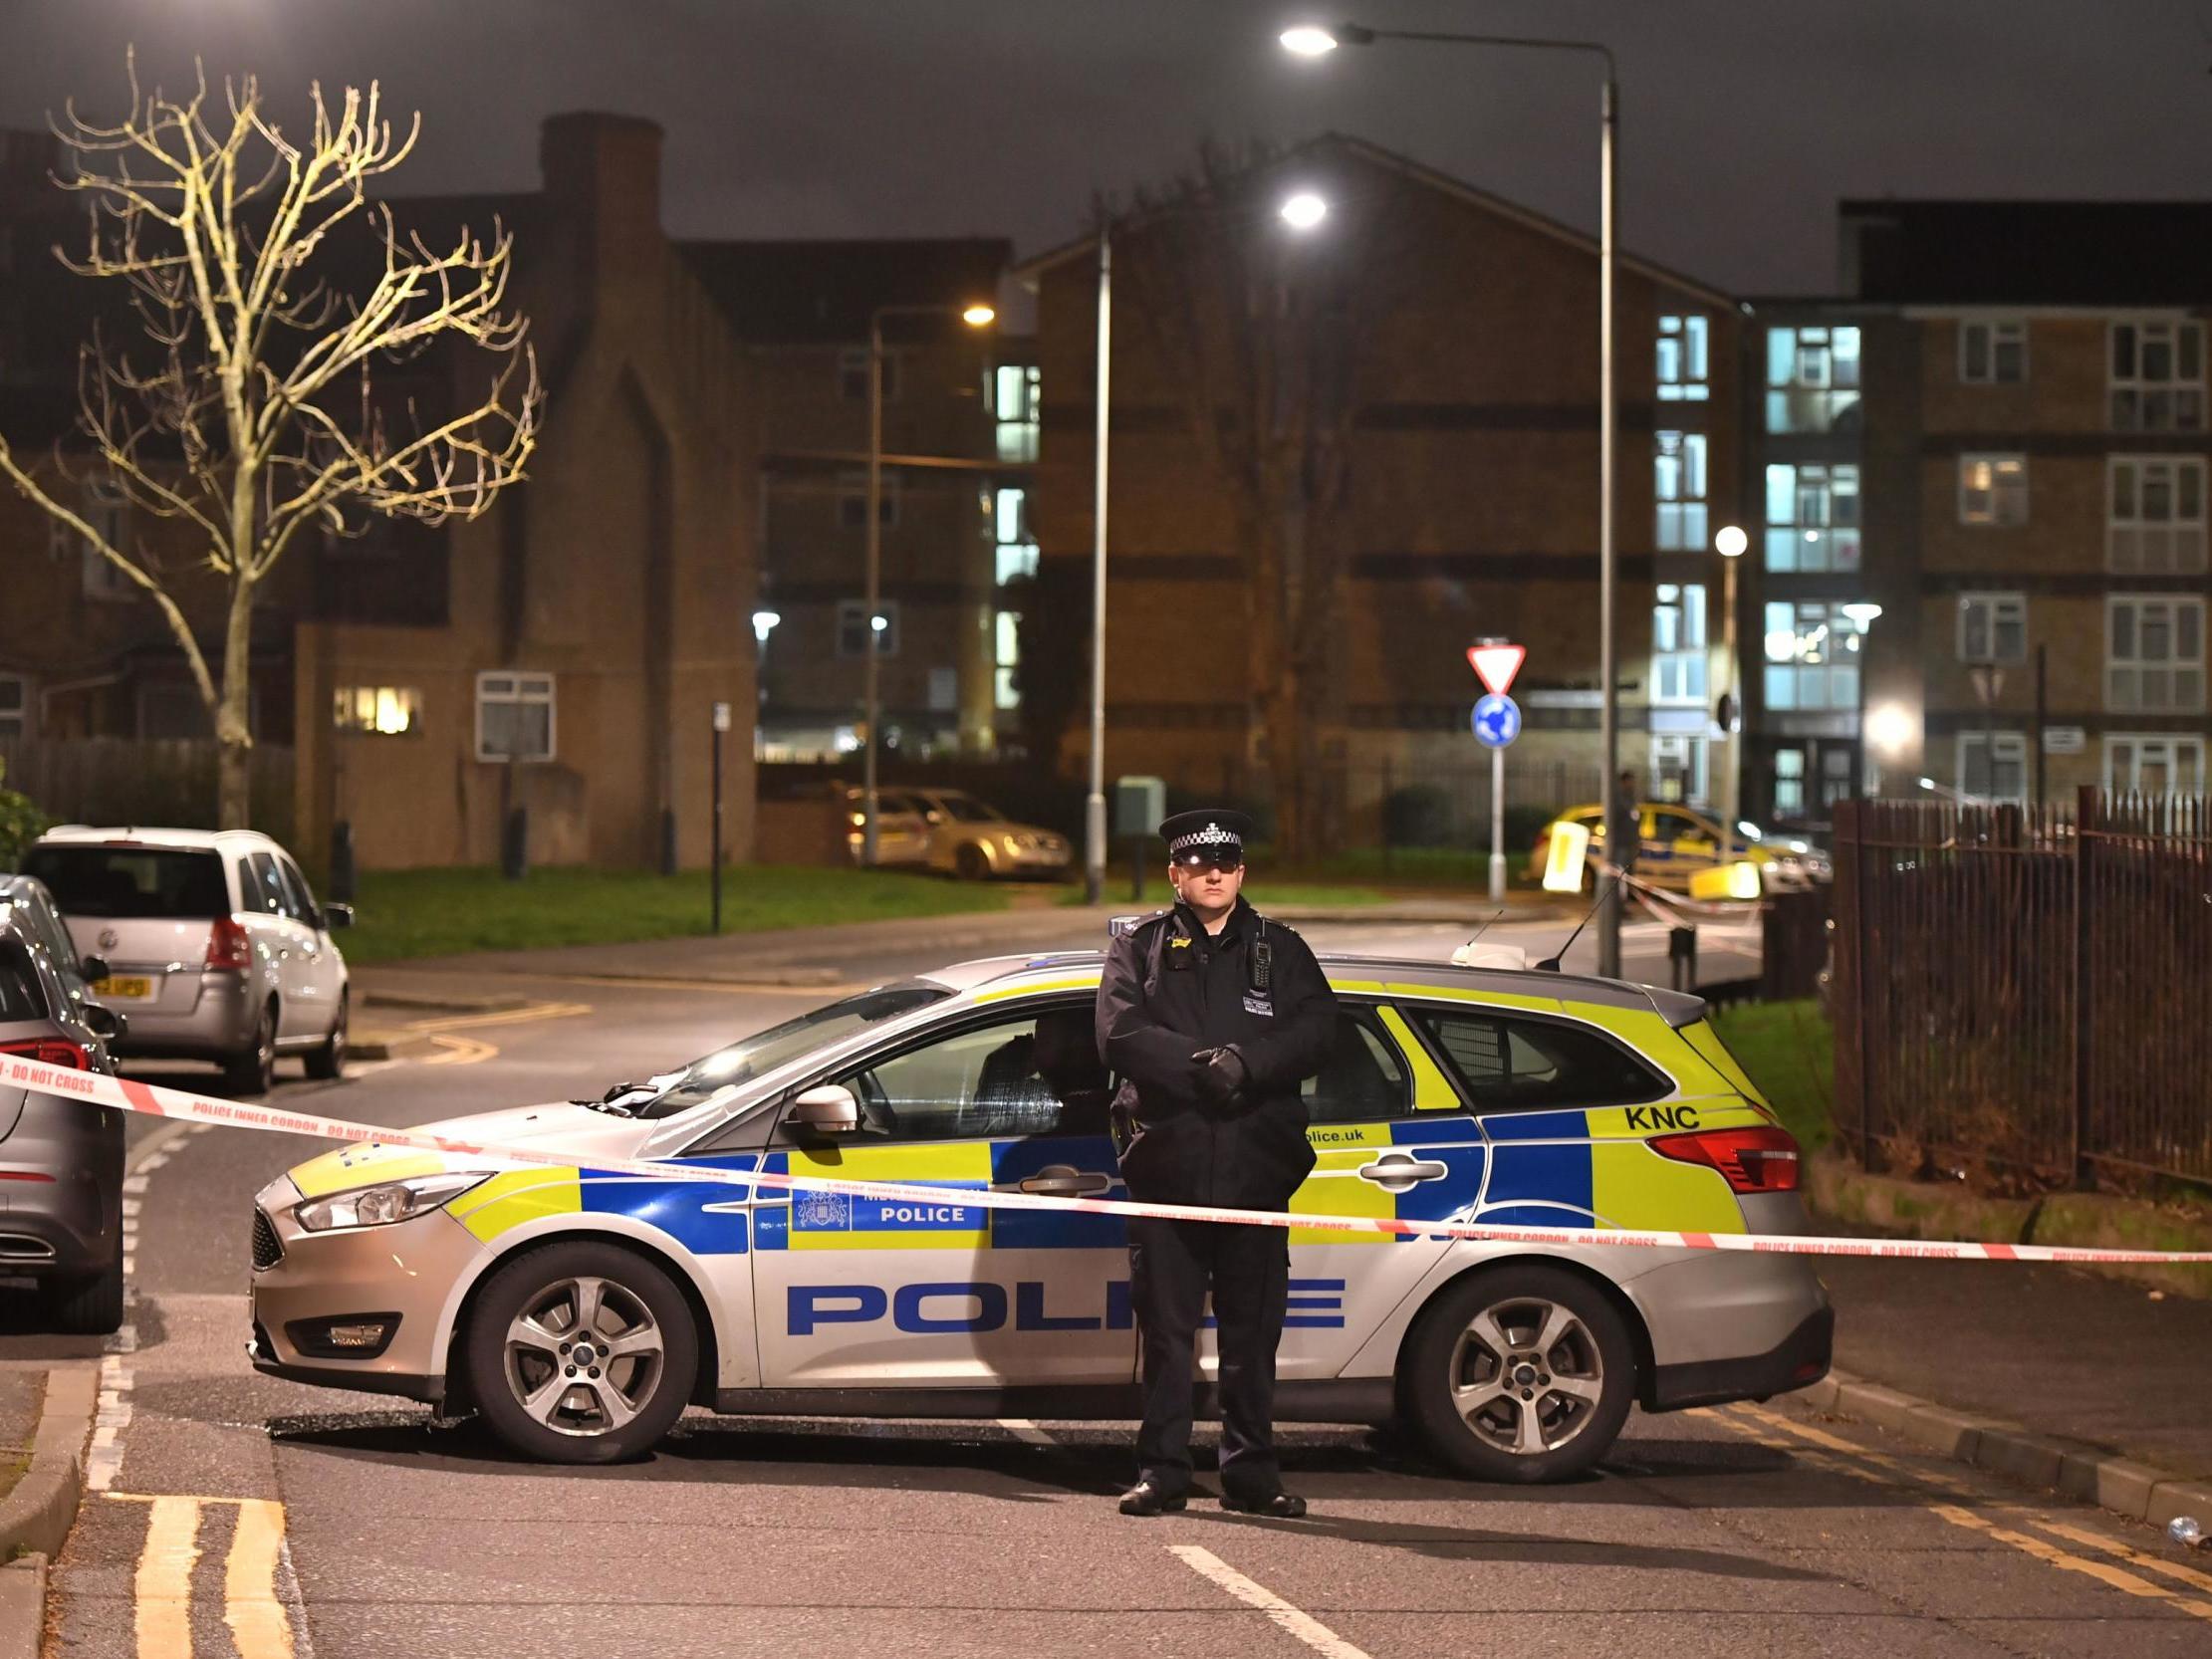 Police at the scene near North Birkbeck Road in Leyton, east London